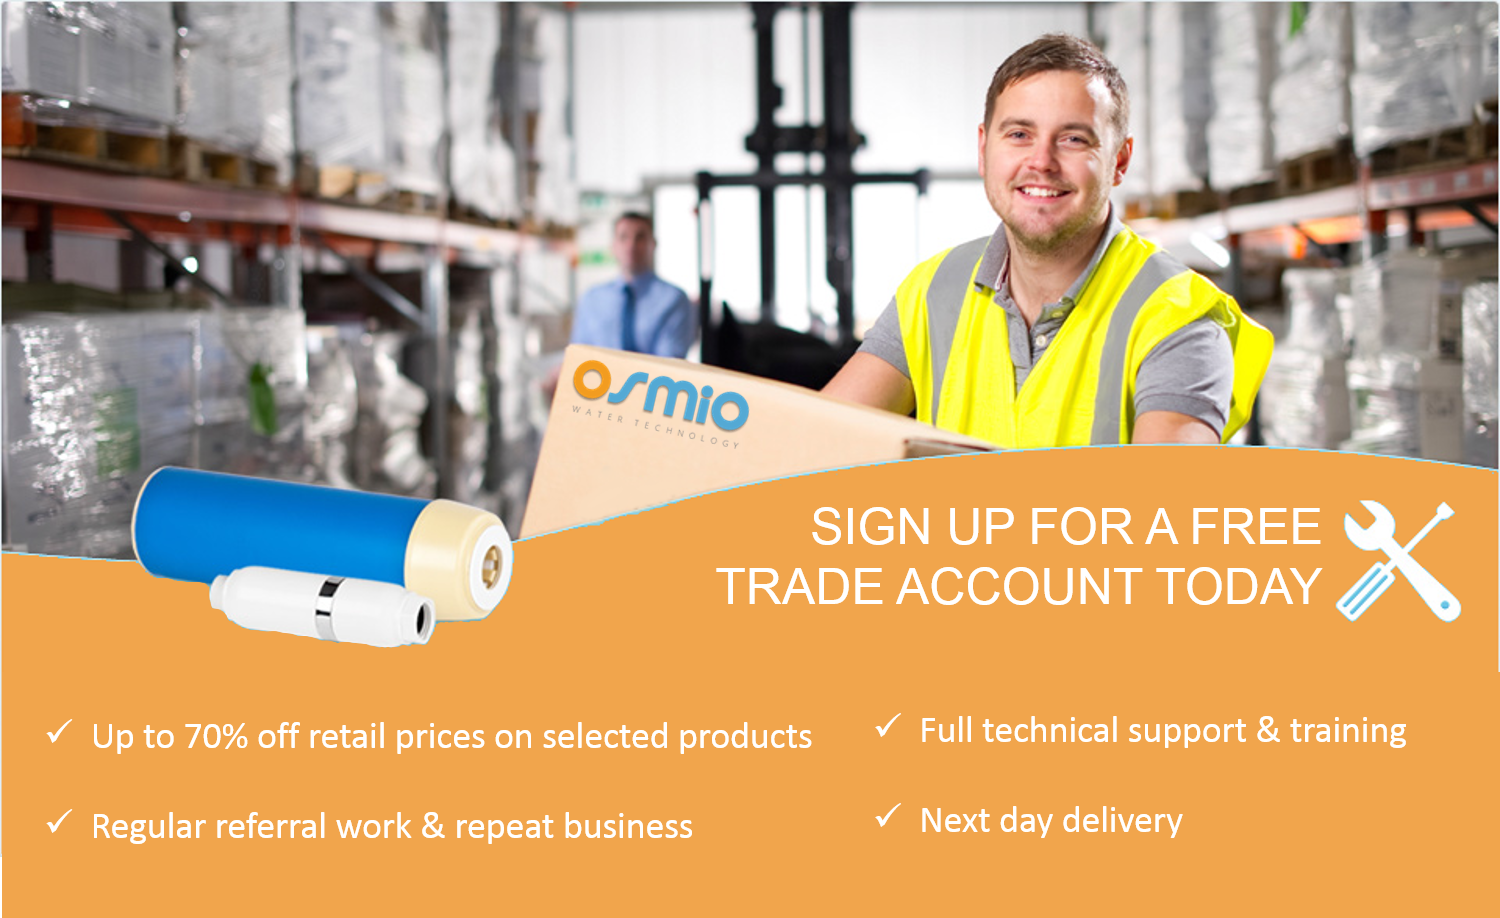 Apply for a trade account today